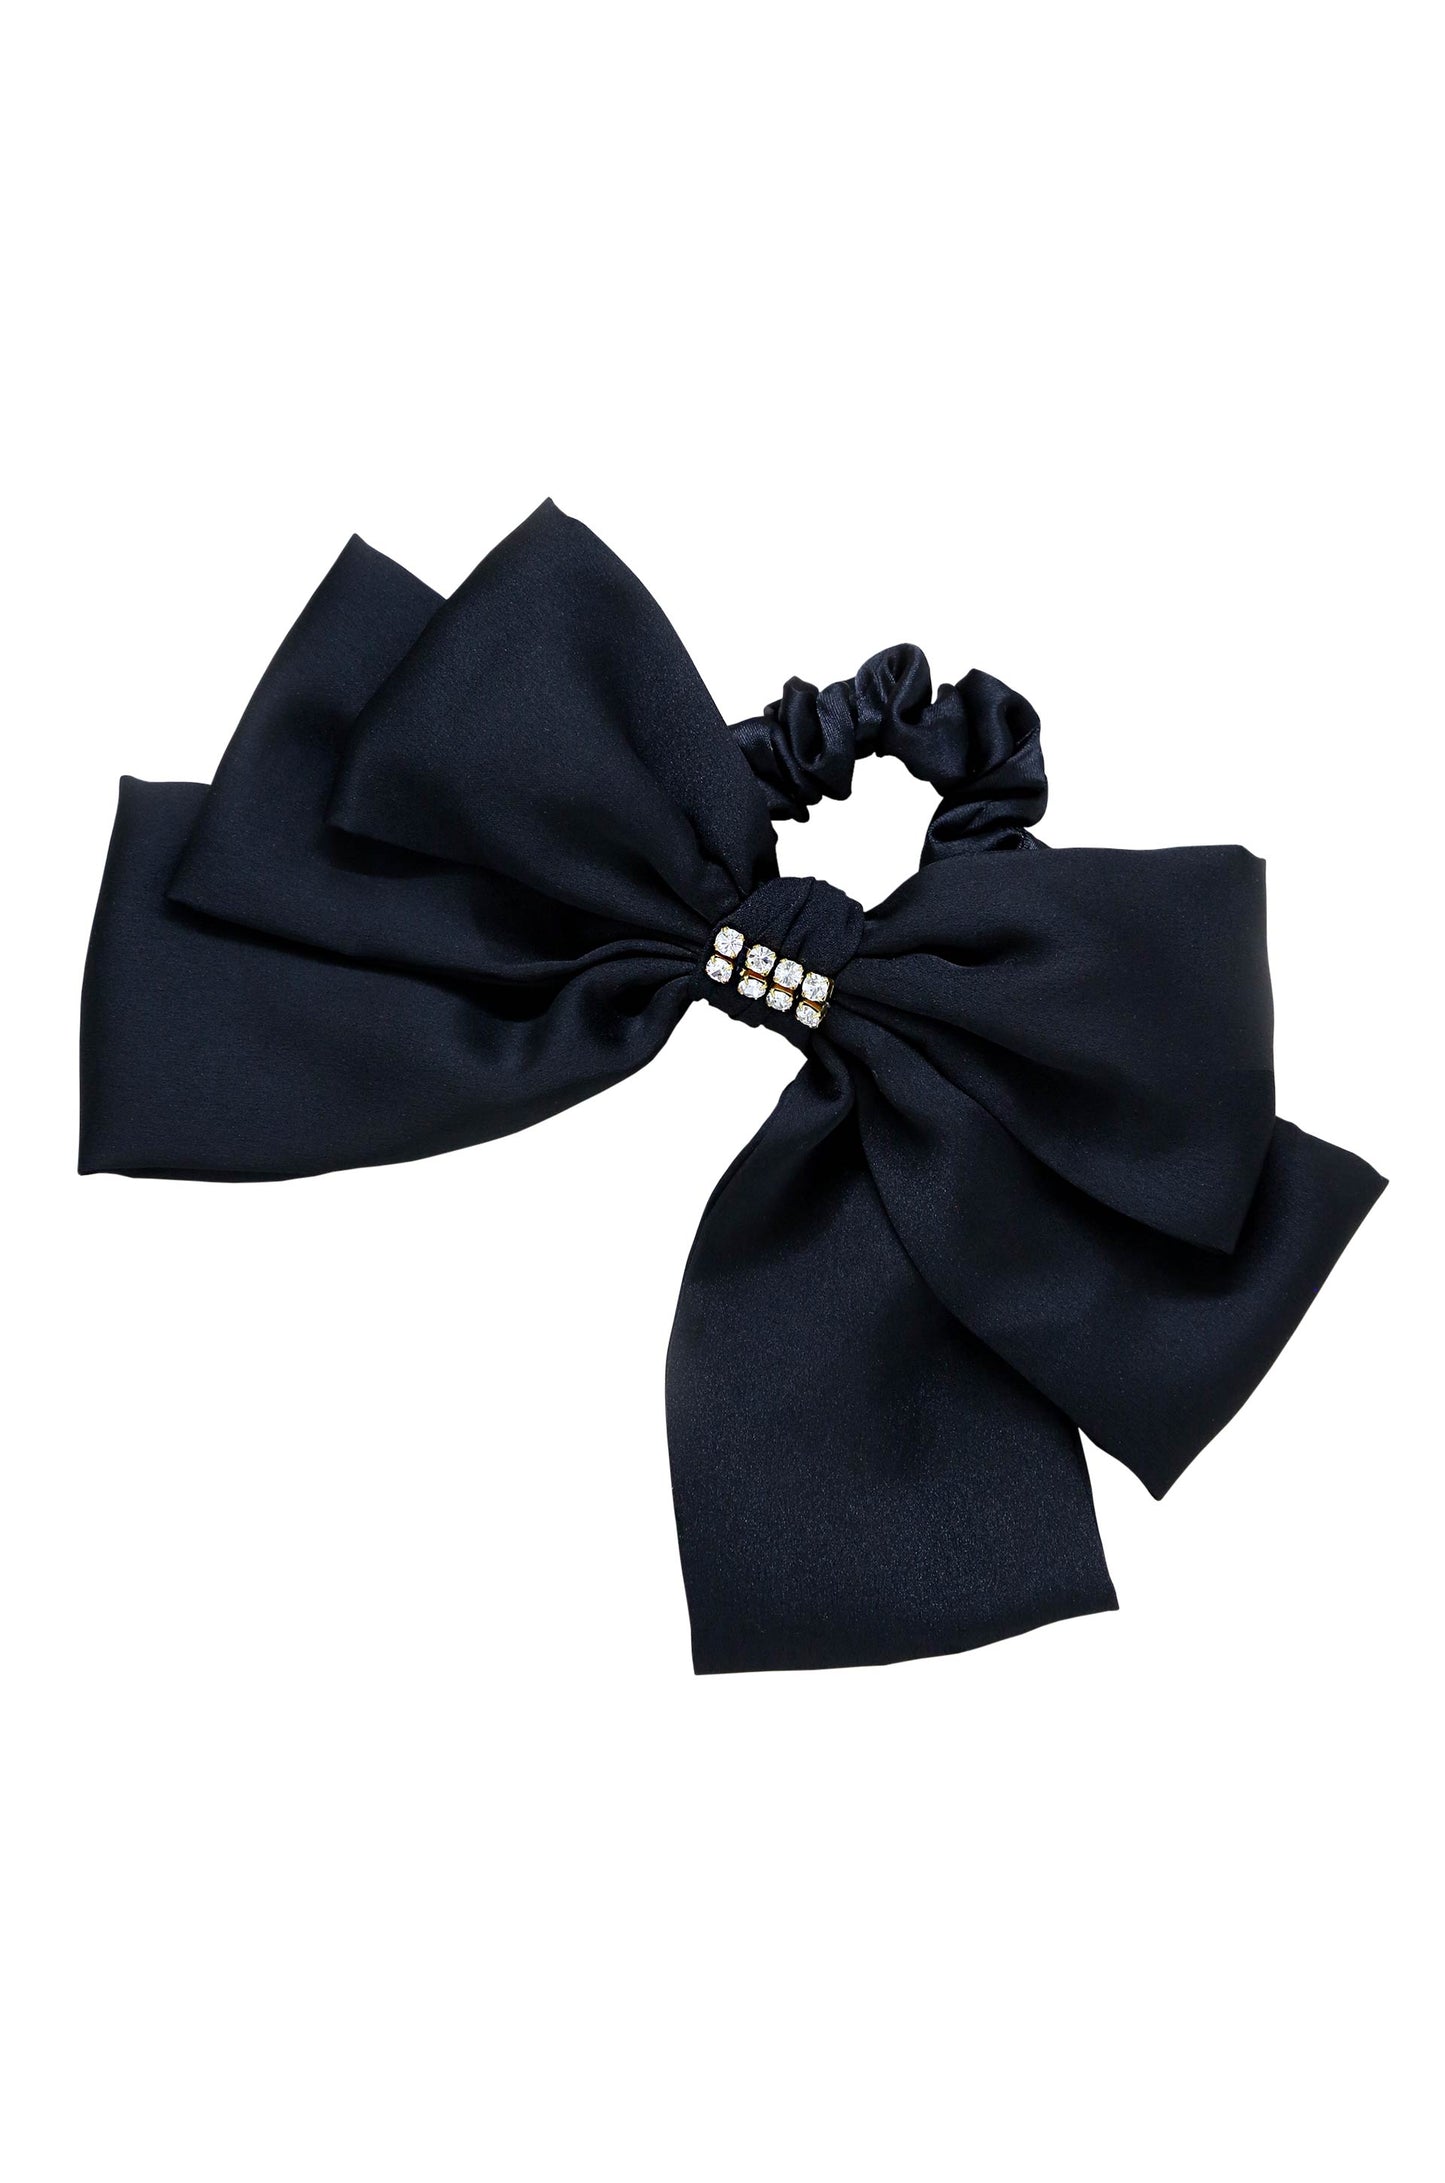 Oversized Bow Scrunchie with Crystal in Black on white background  